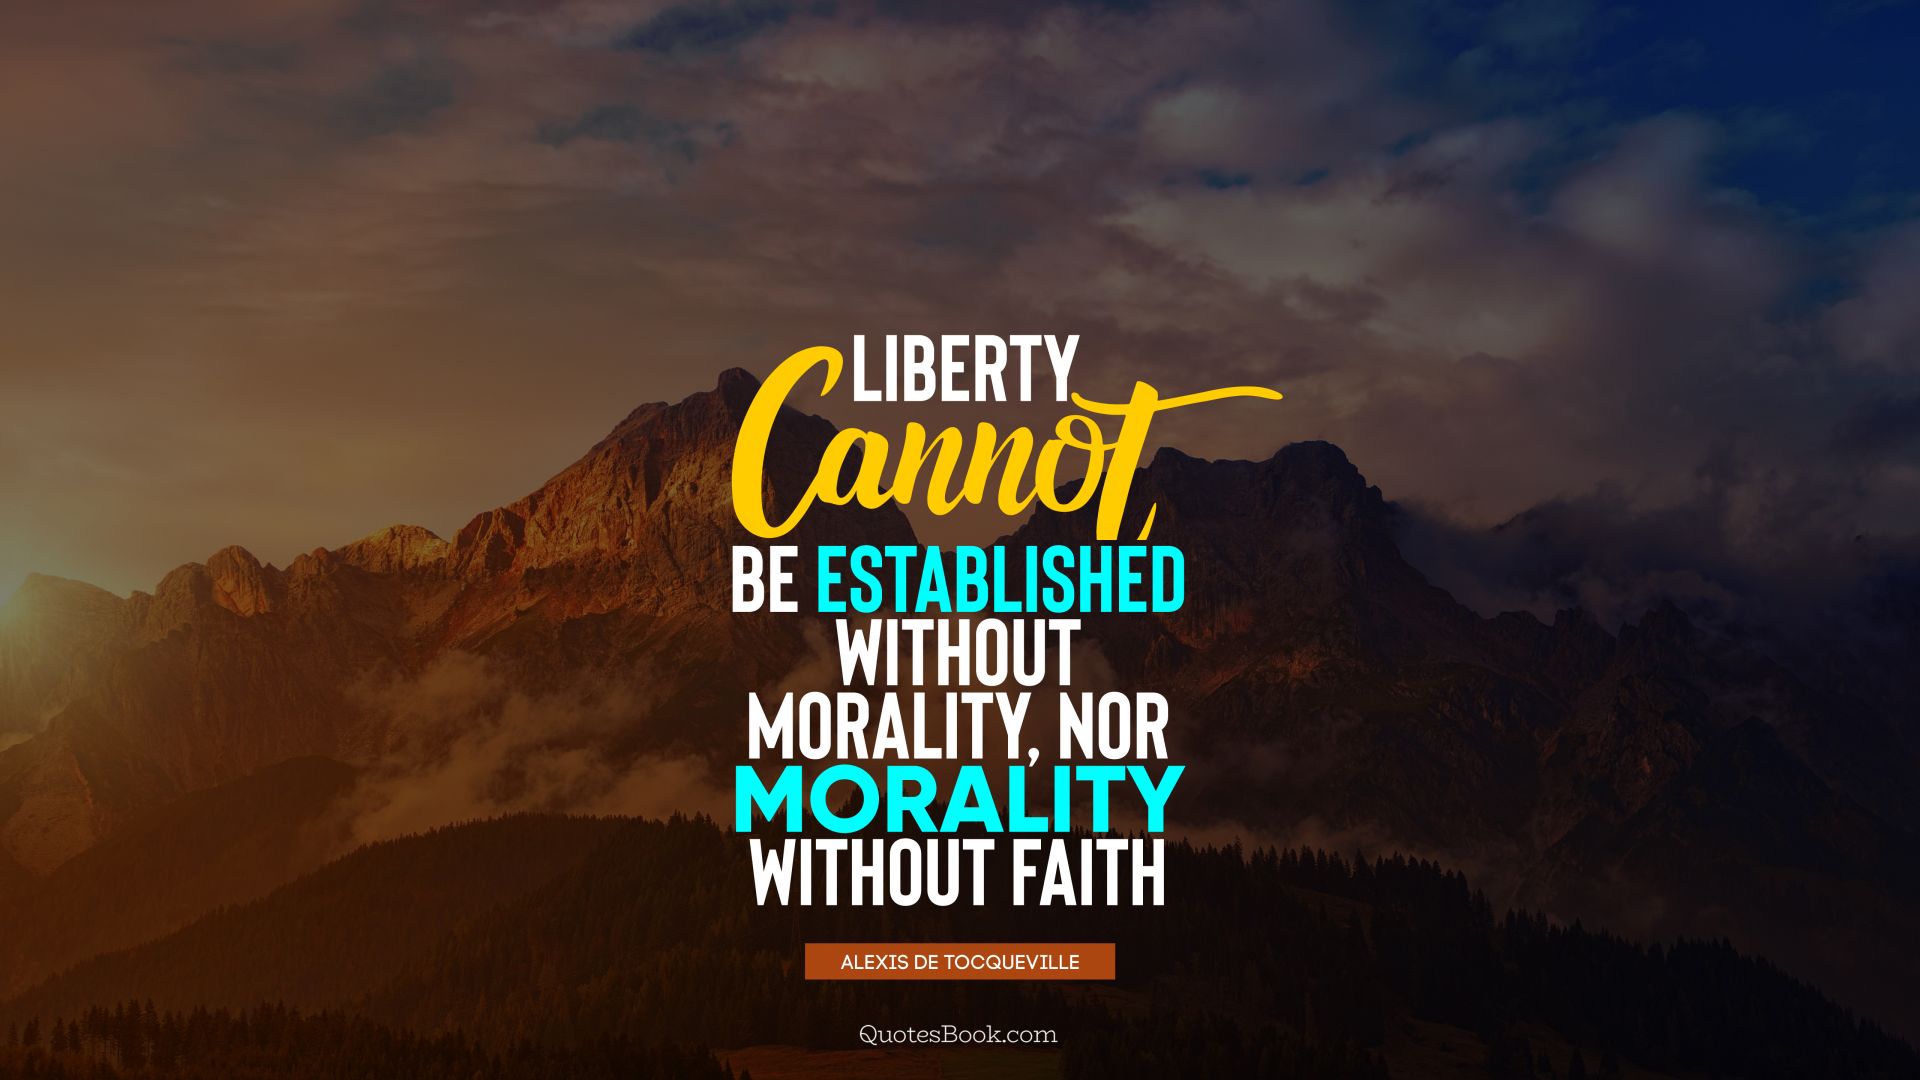 Liberty cannot be established without morality, nor morality without faith. - Quote by Alexis de Tocqueville